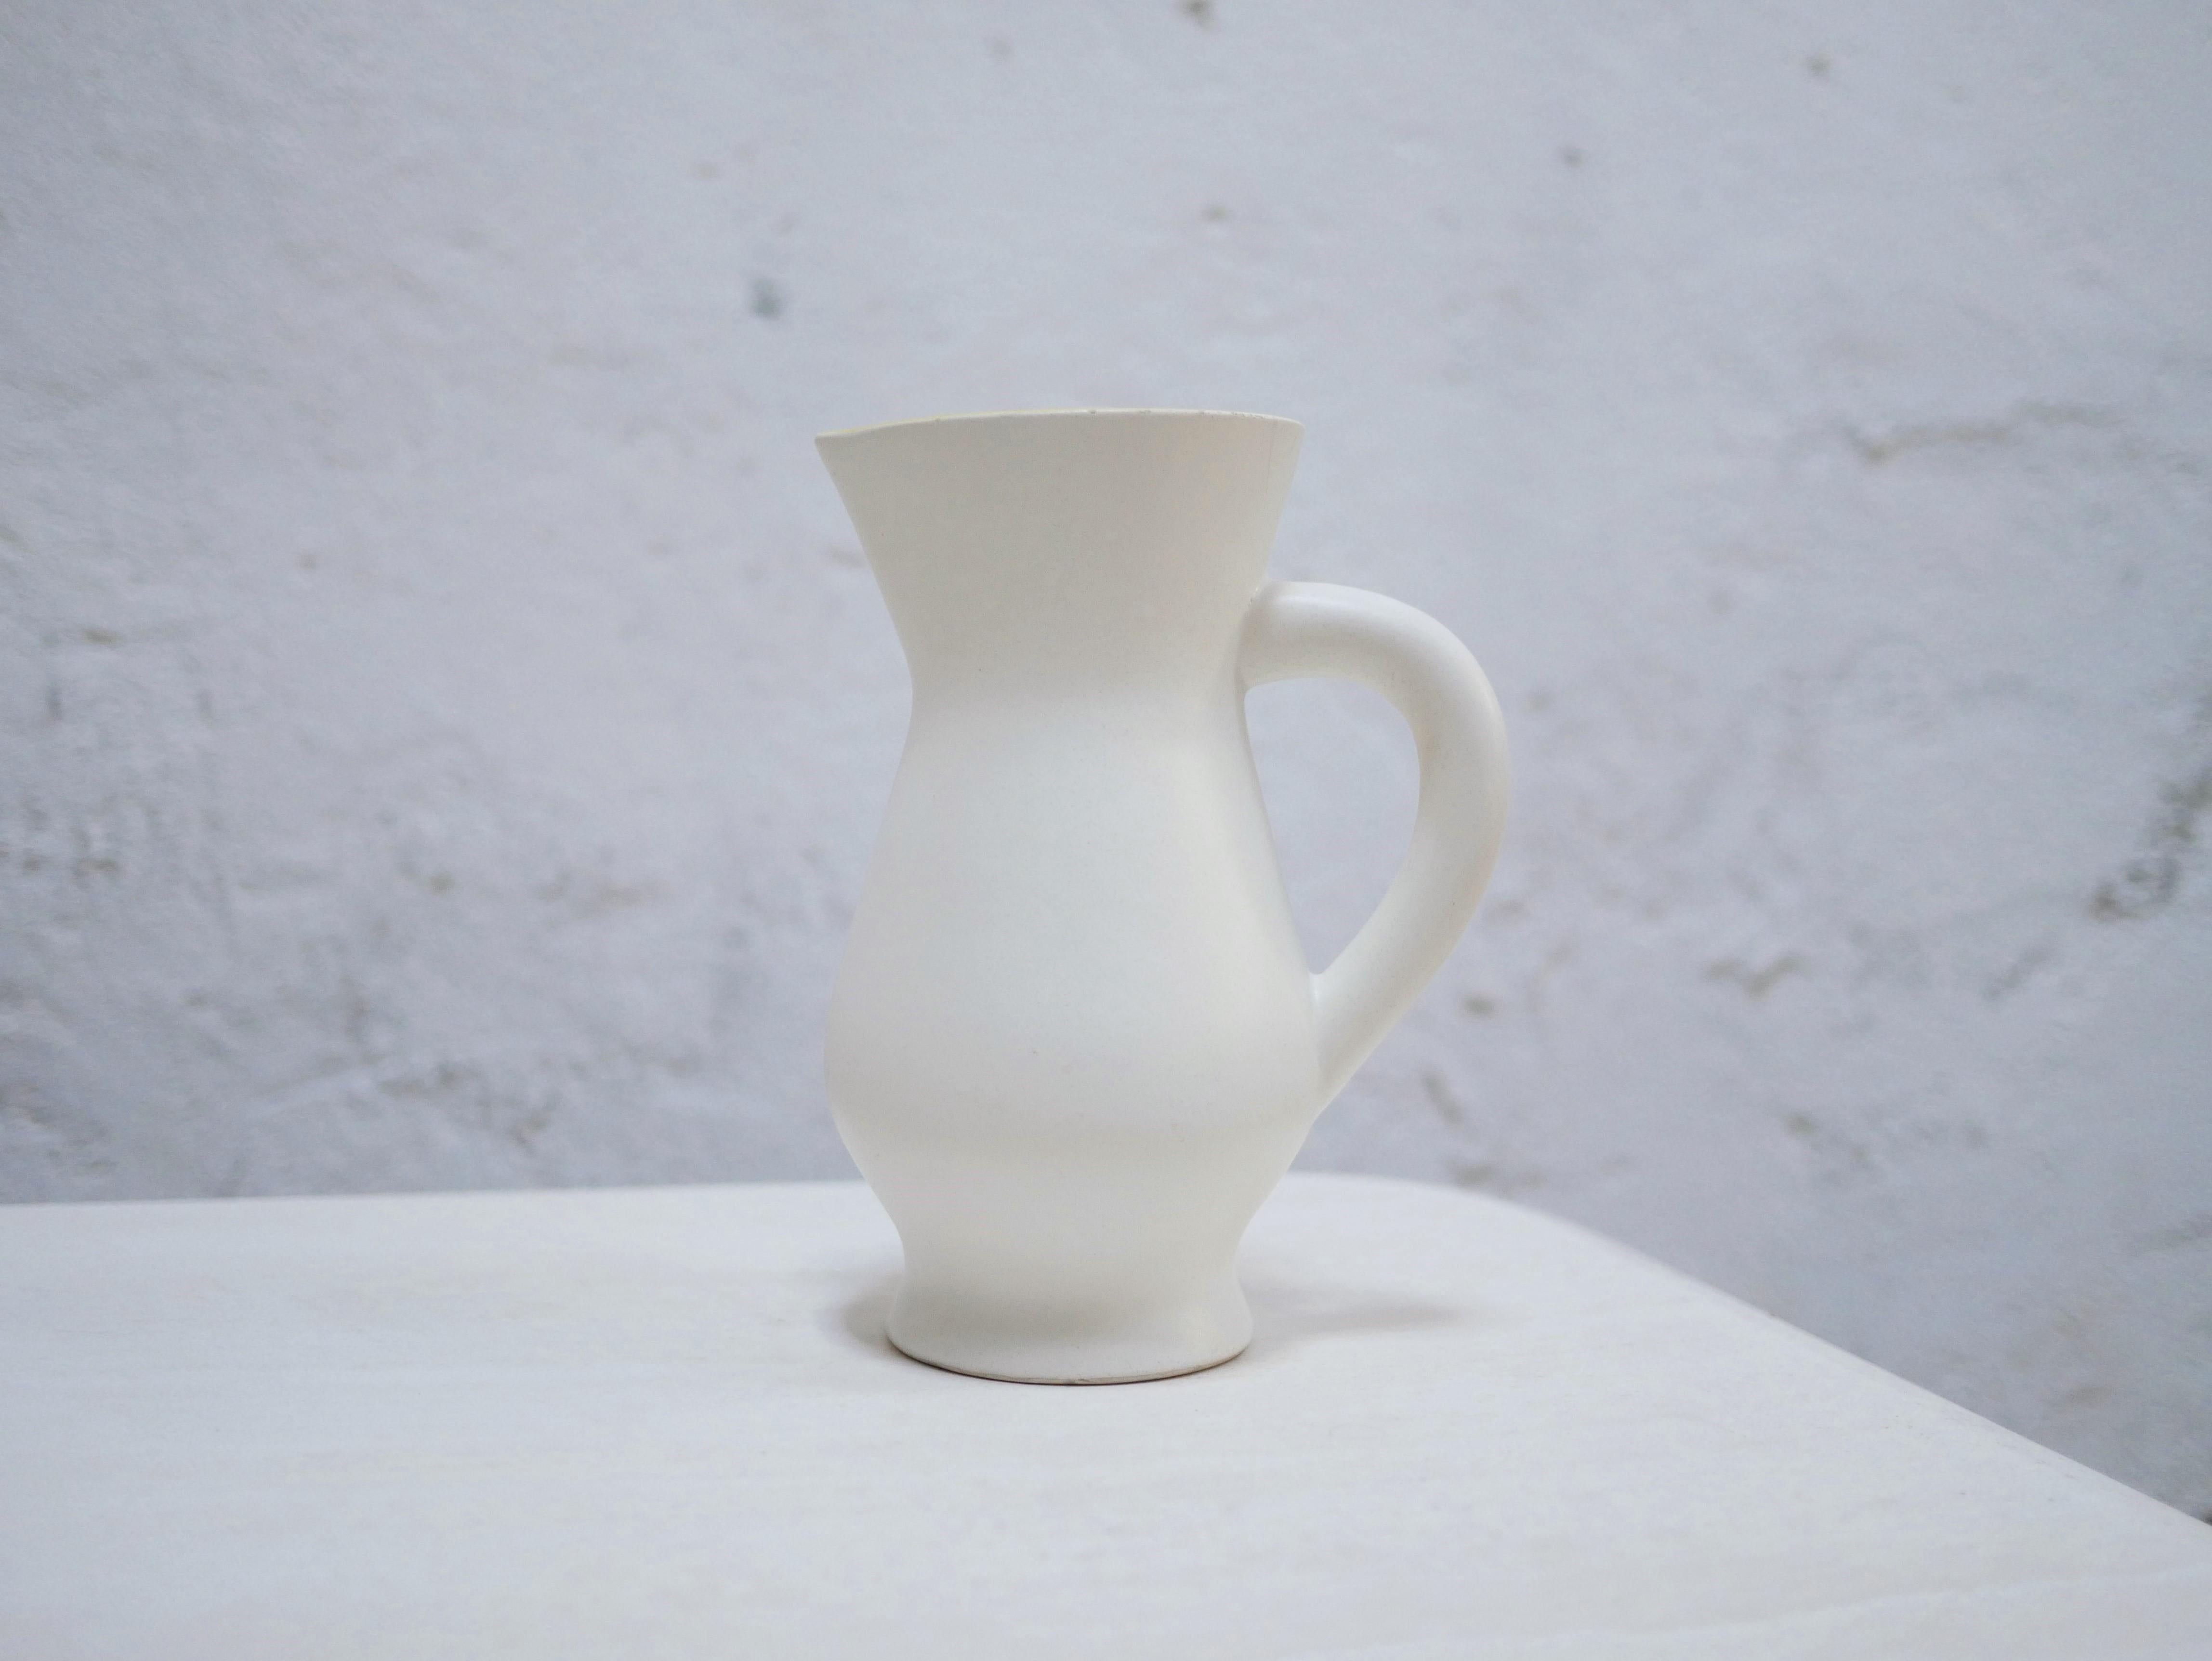 Ceramic pitcher designed by the Saint Clément factory in the 1950s.

Trendy and current, this pitcher does not lack character and elegance. Nice contrast between the minimalist milky white exterior and the vibrant yellow interior.
It will be perfect